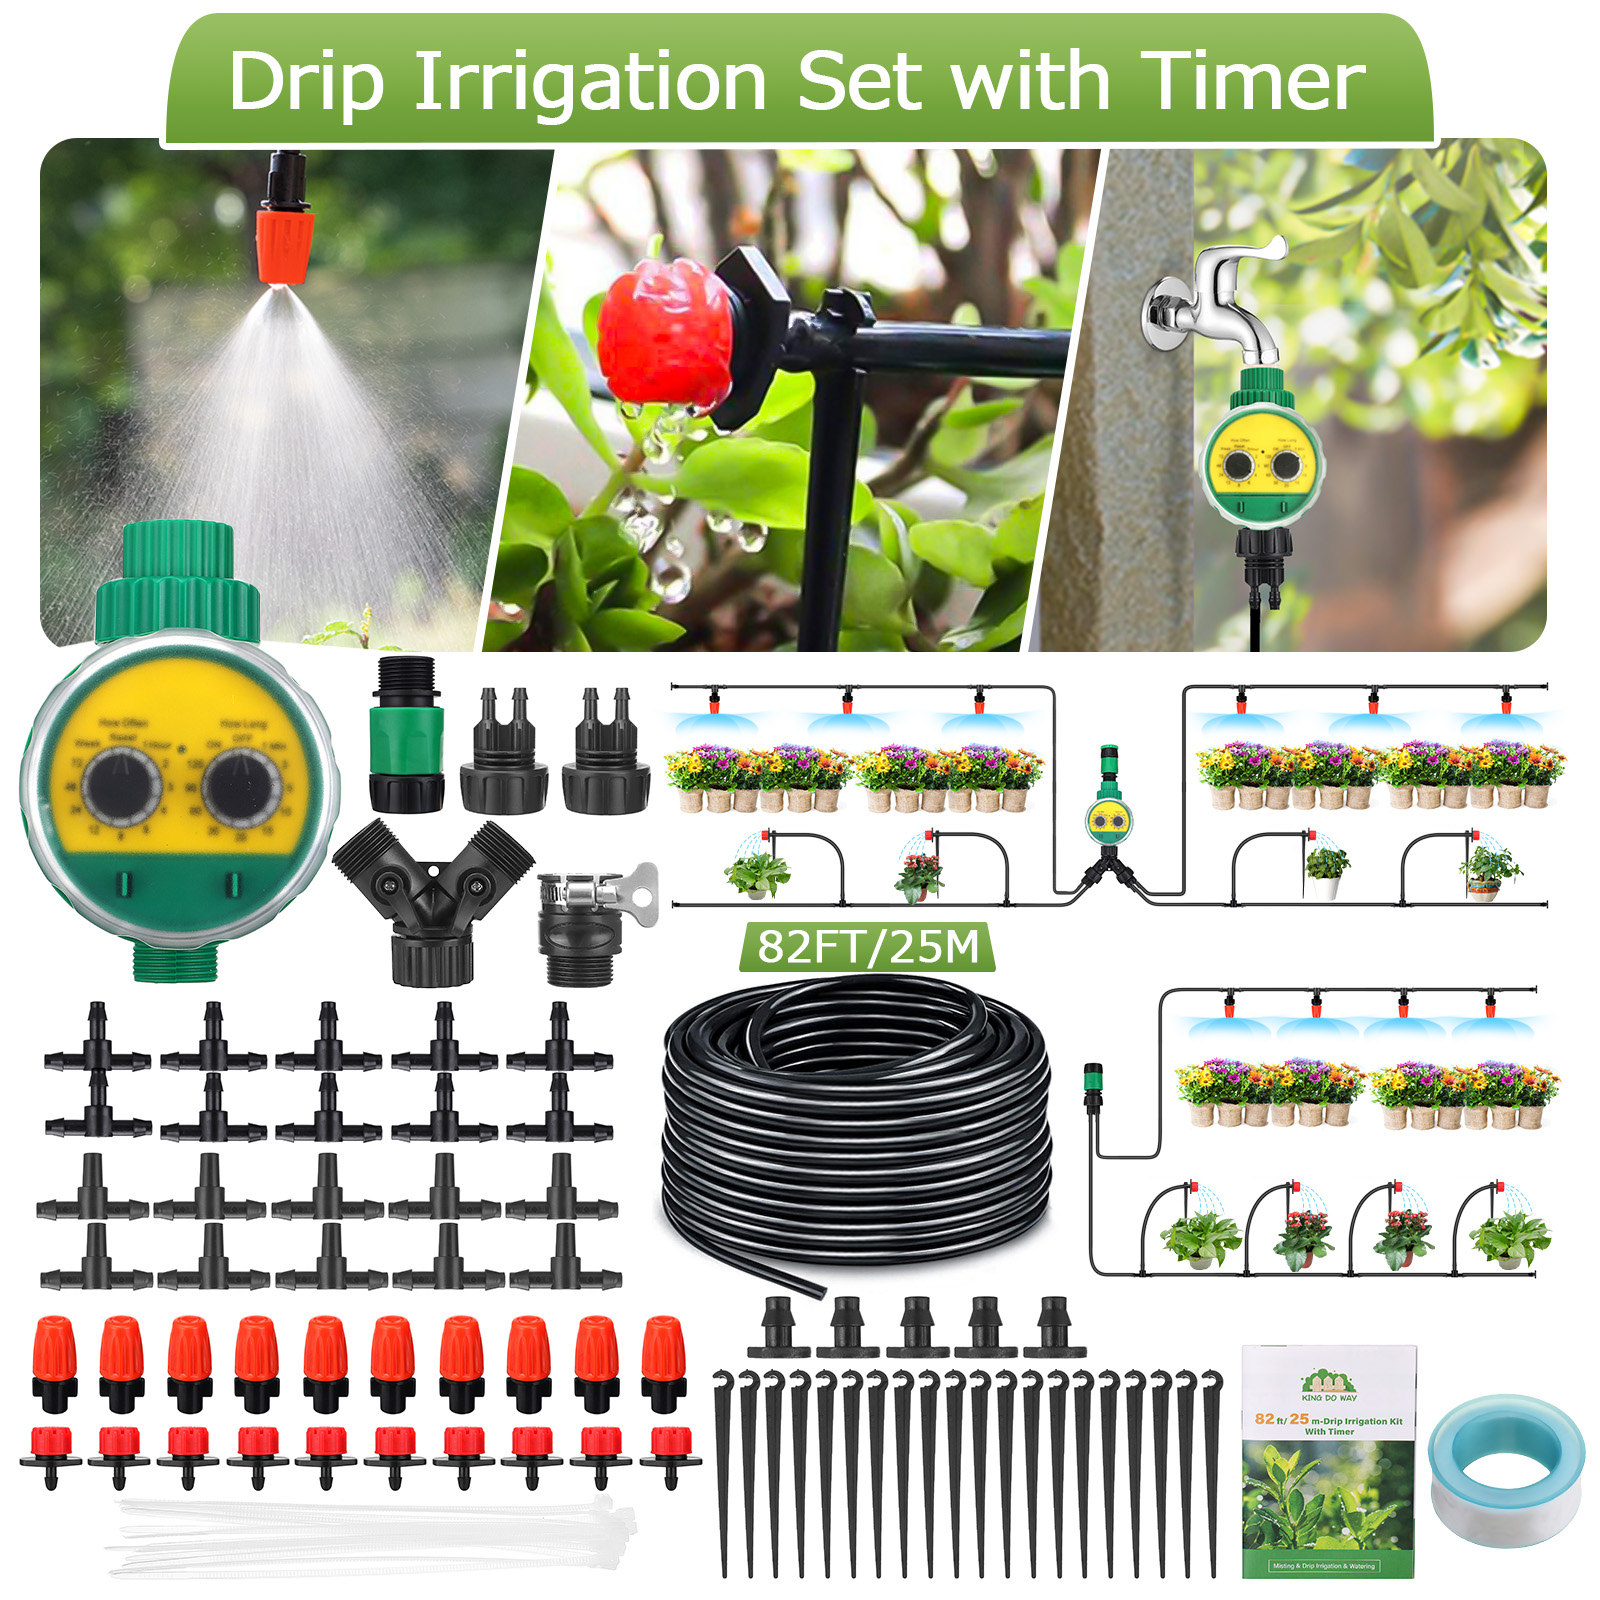 KING-DO-WAY-Drip-Irrigation-Kit-with-Water-Timer-Water-Pipe-and-Full-Language-Manual-and-Other-Acces-1829777-1